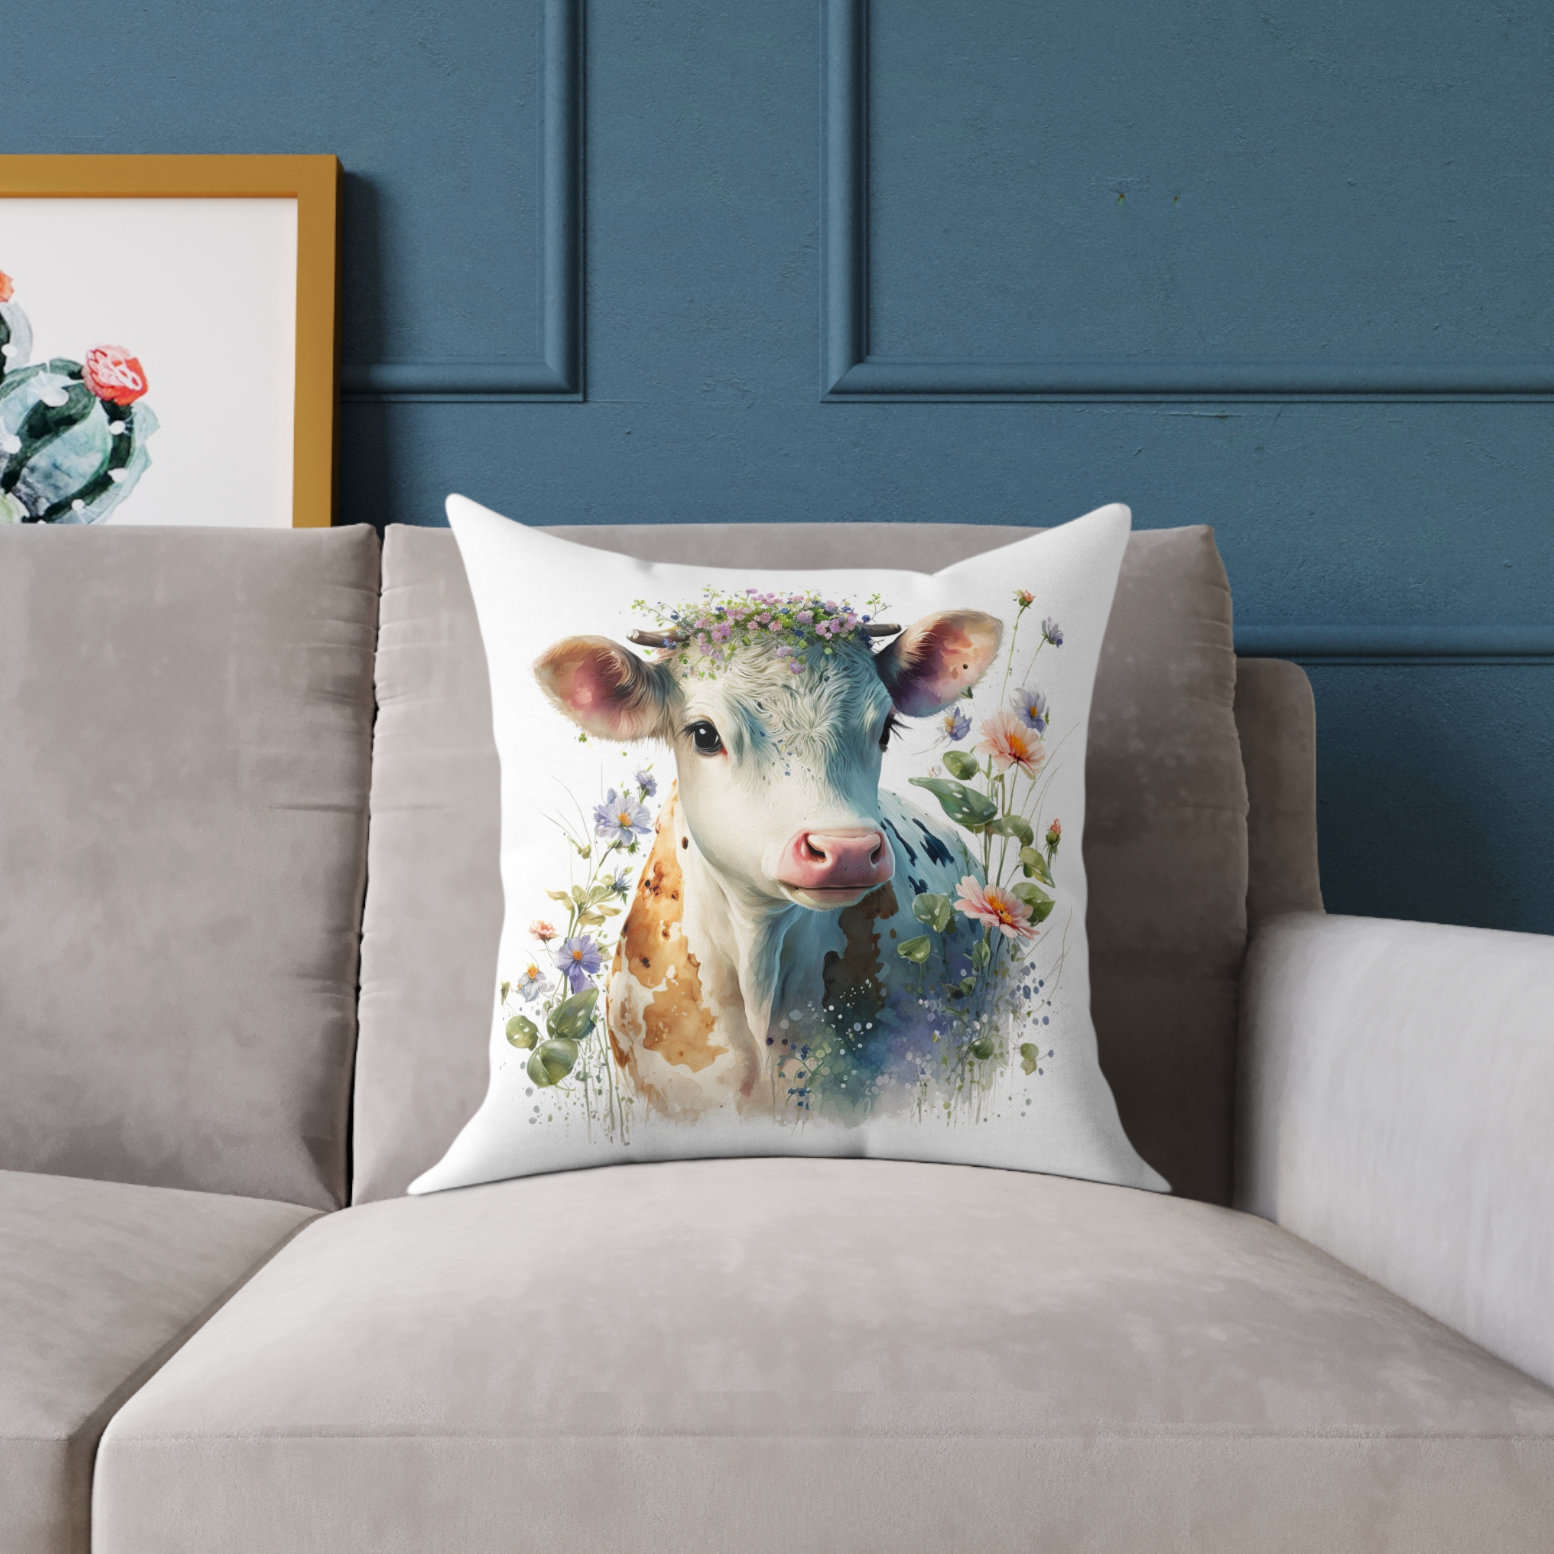 cow pillow on a couch, cow throw pillow decorating a chair, cow accent pillow lying on a lounger, cow theme room decor 